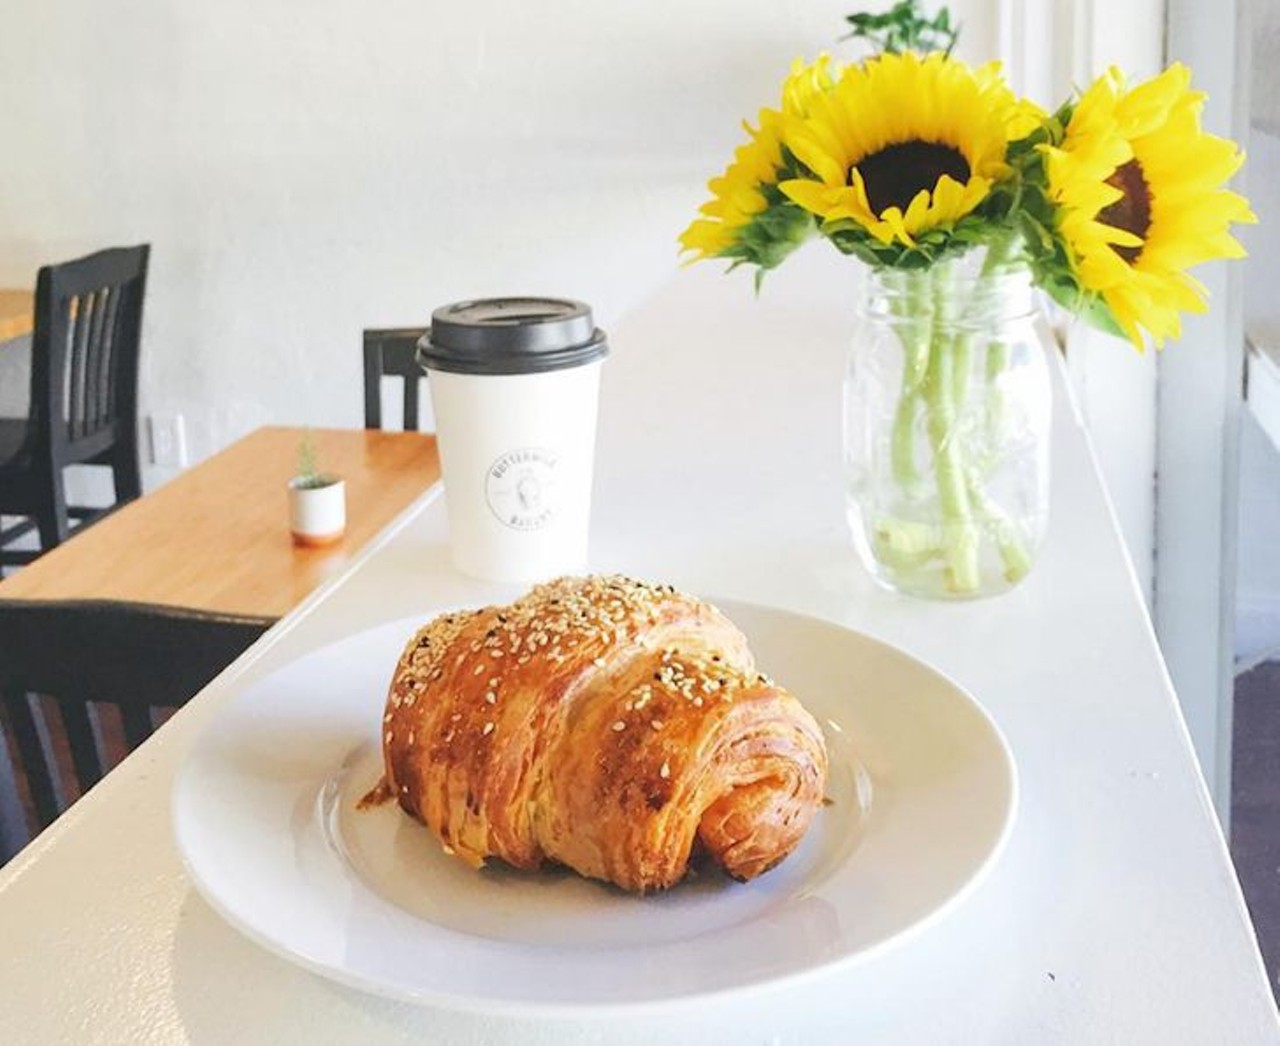 Buttermilk Bakery
1198 N. Orange Ave., (321) 422-4015
This fairly new, family-owned small-batch bakery and caf&eacute; serves homemade treats using as-local-as-possible seasonal ingredients. 
Photo via theorlandogirl/Instagram